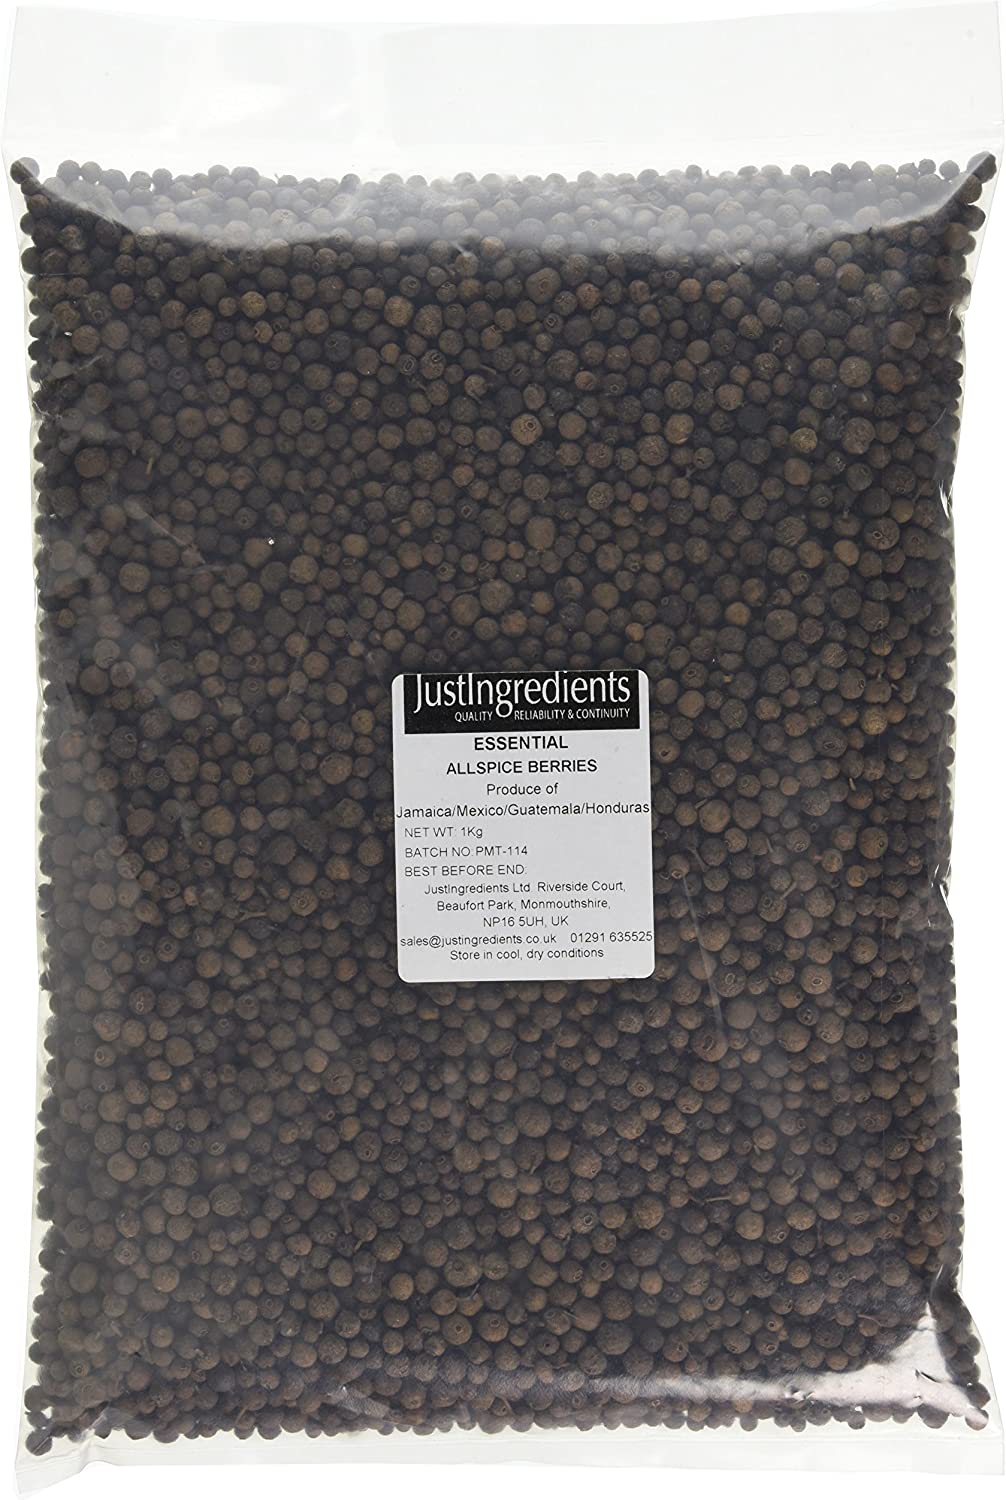 Just Ingredients Allspice Berries 1kg RRP 21.08 CLEARANCE XL 12.99